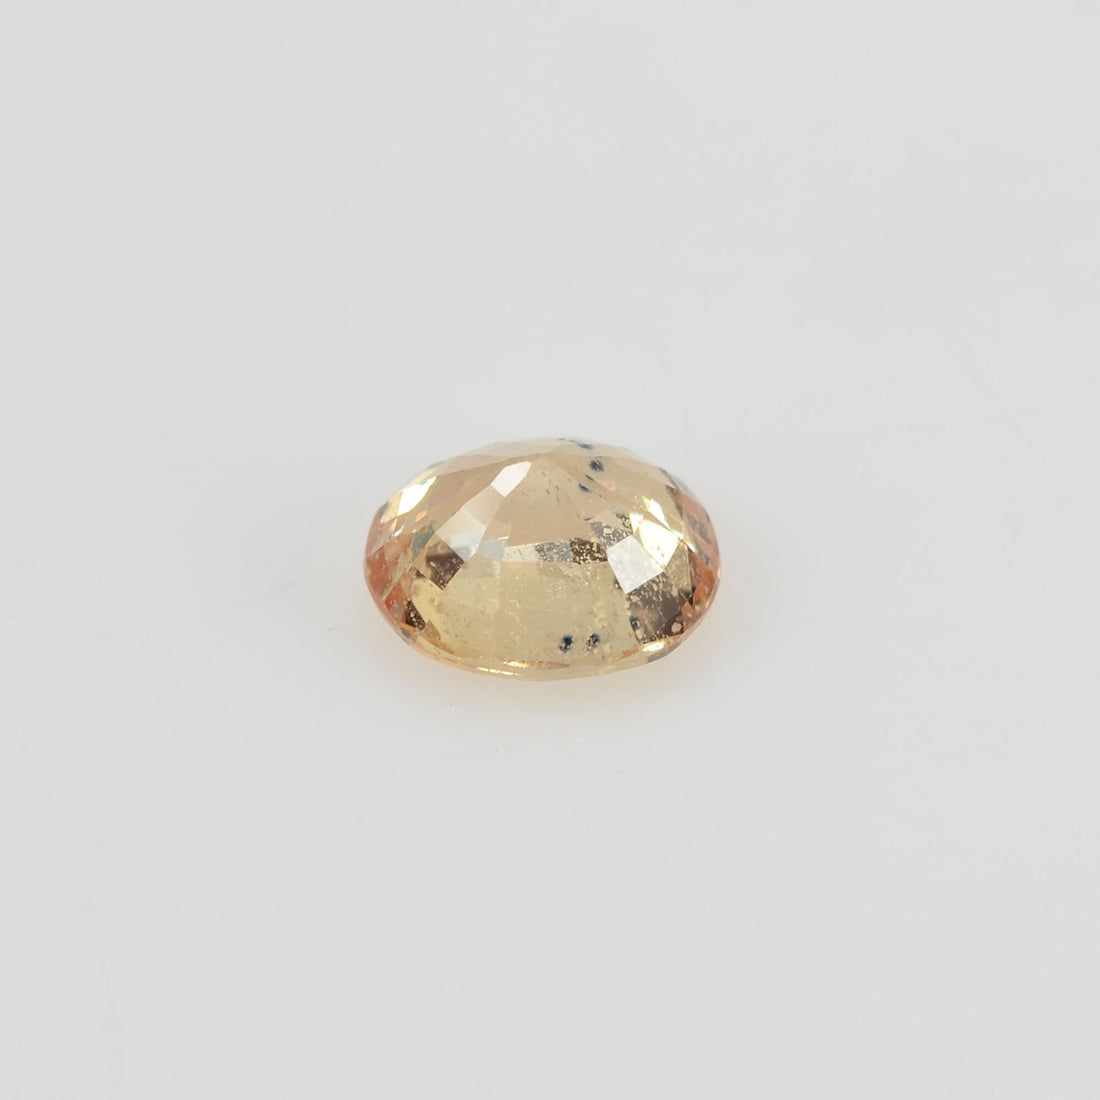 0.90 cts Natural Yellow Sapphire Loose Gemstone Oval Cut